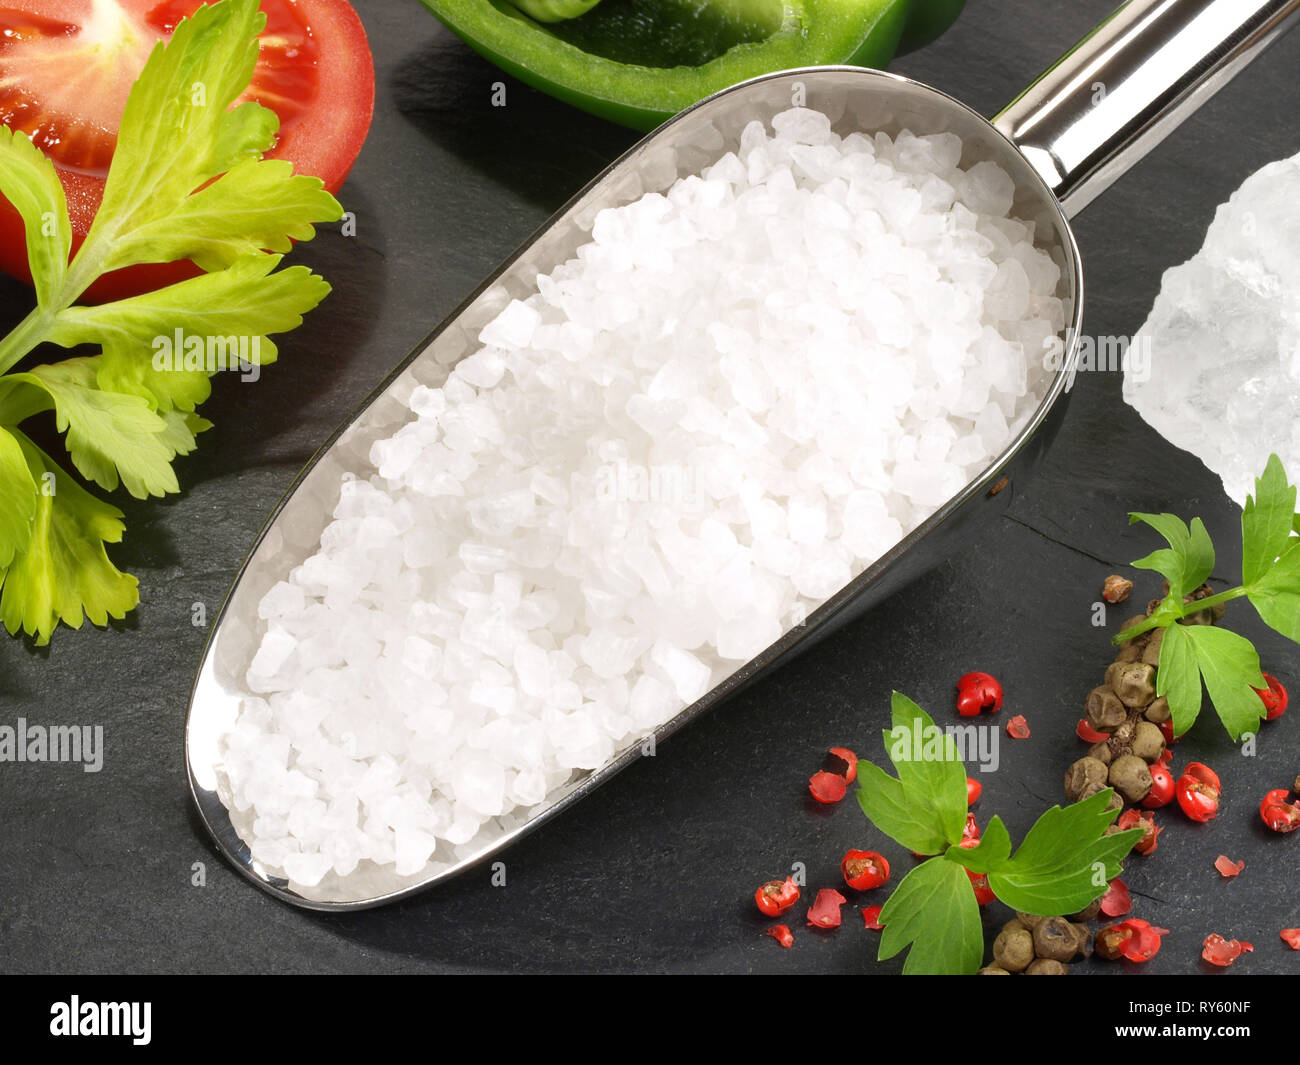 Cooking with Sea Salt - Healthy Nutrition Stock Photo